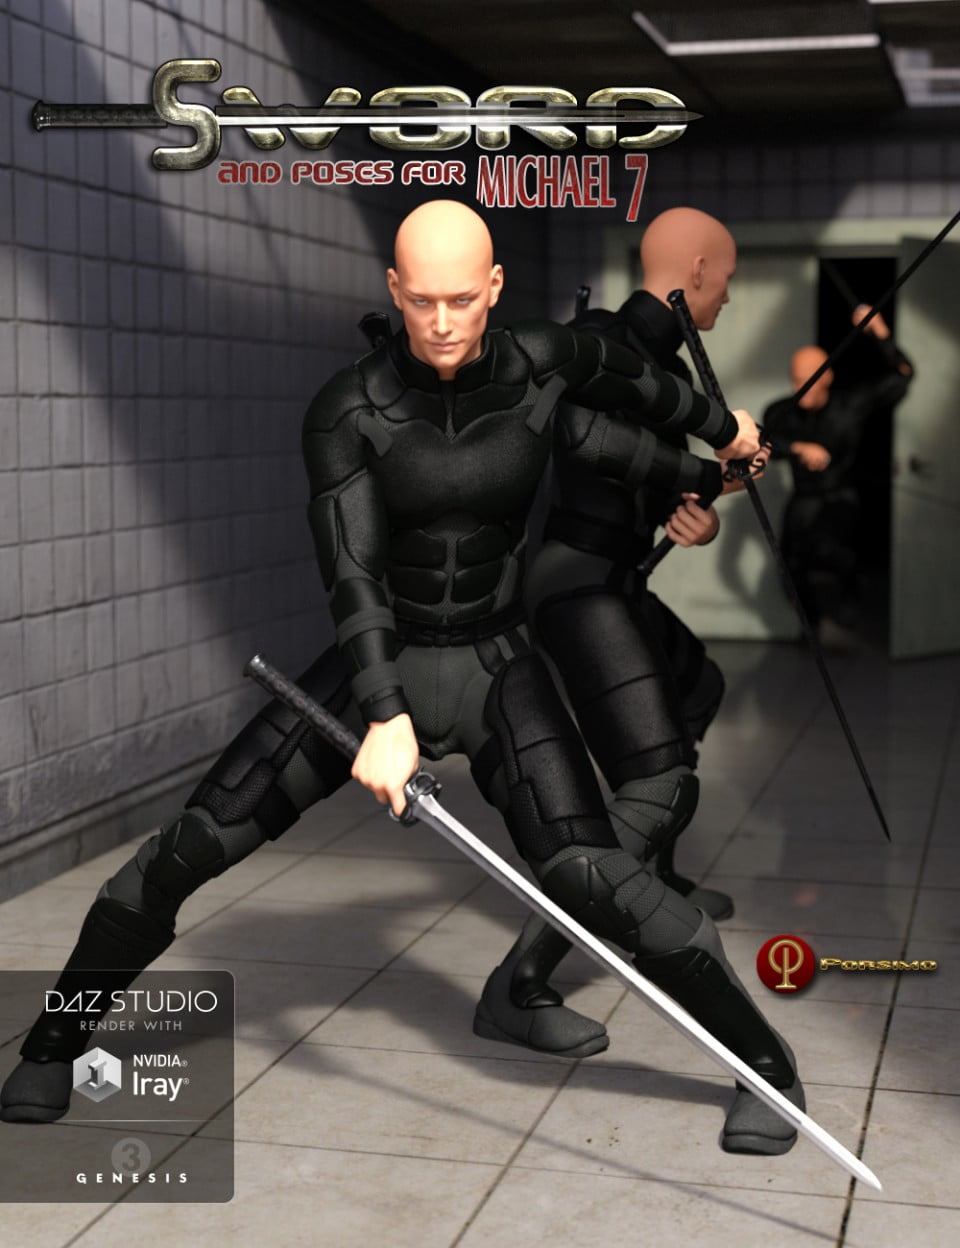 00-main-sword-and-poses-for-michael-7-daz3d